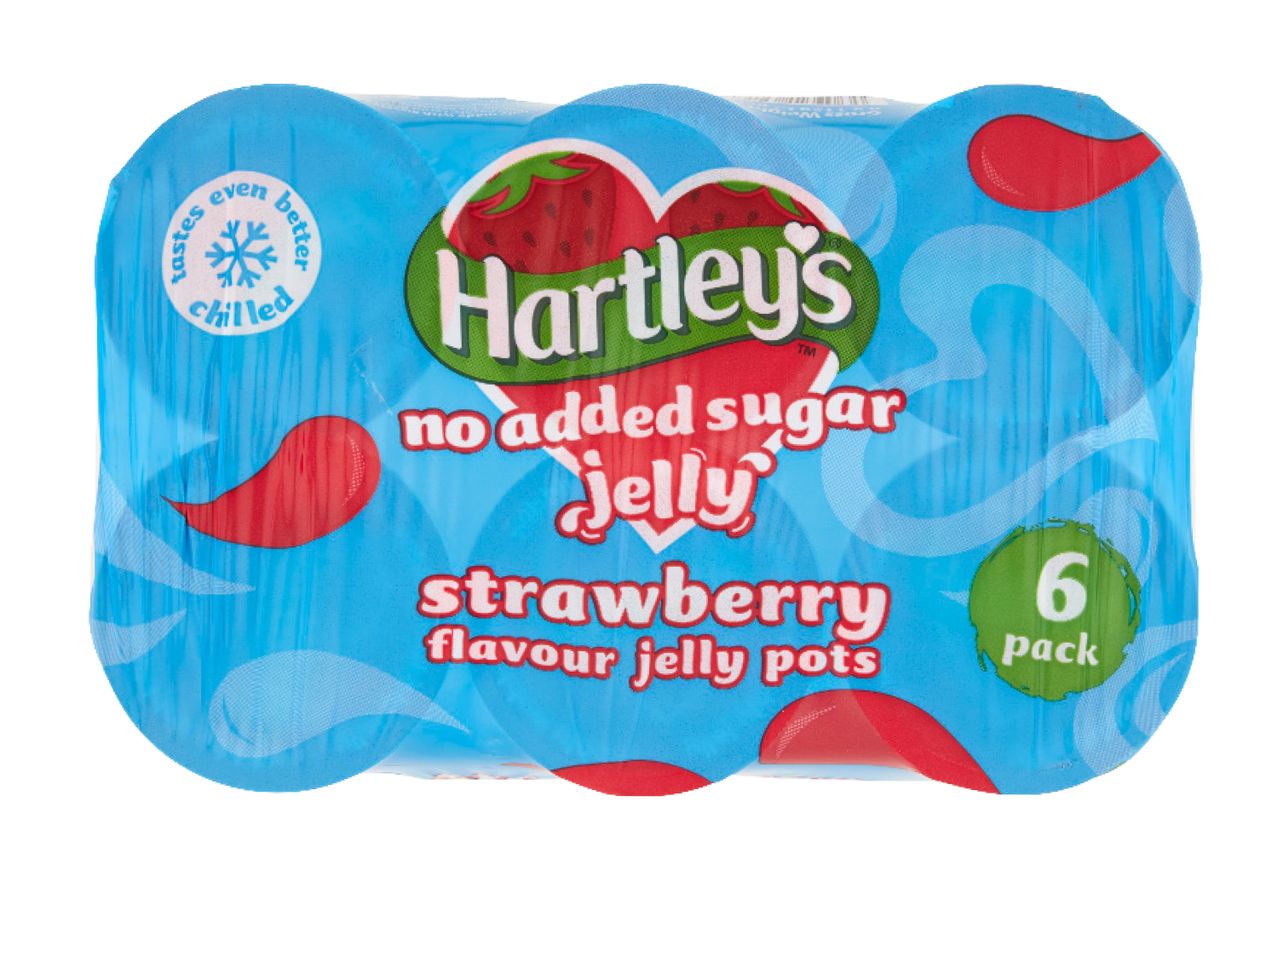 Go to full screen view: Hartley's 6 Ready To Eat Jelly Pots (no added sugar) - Image 1